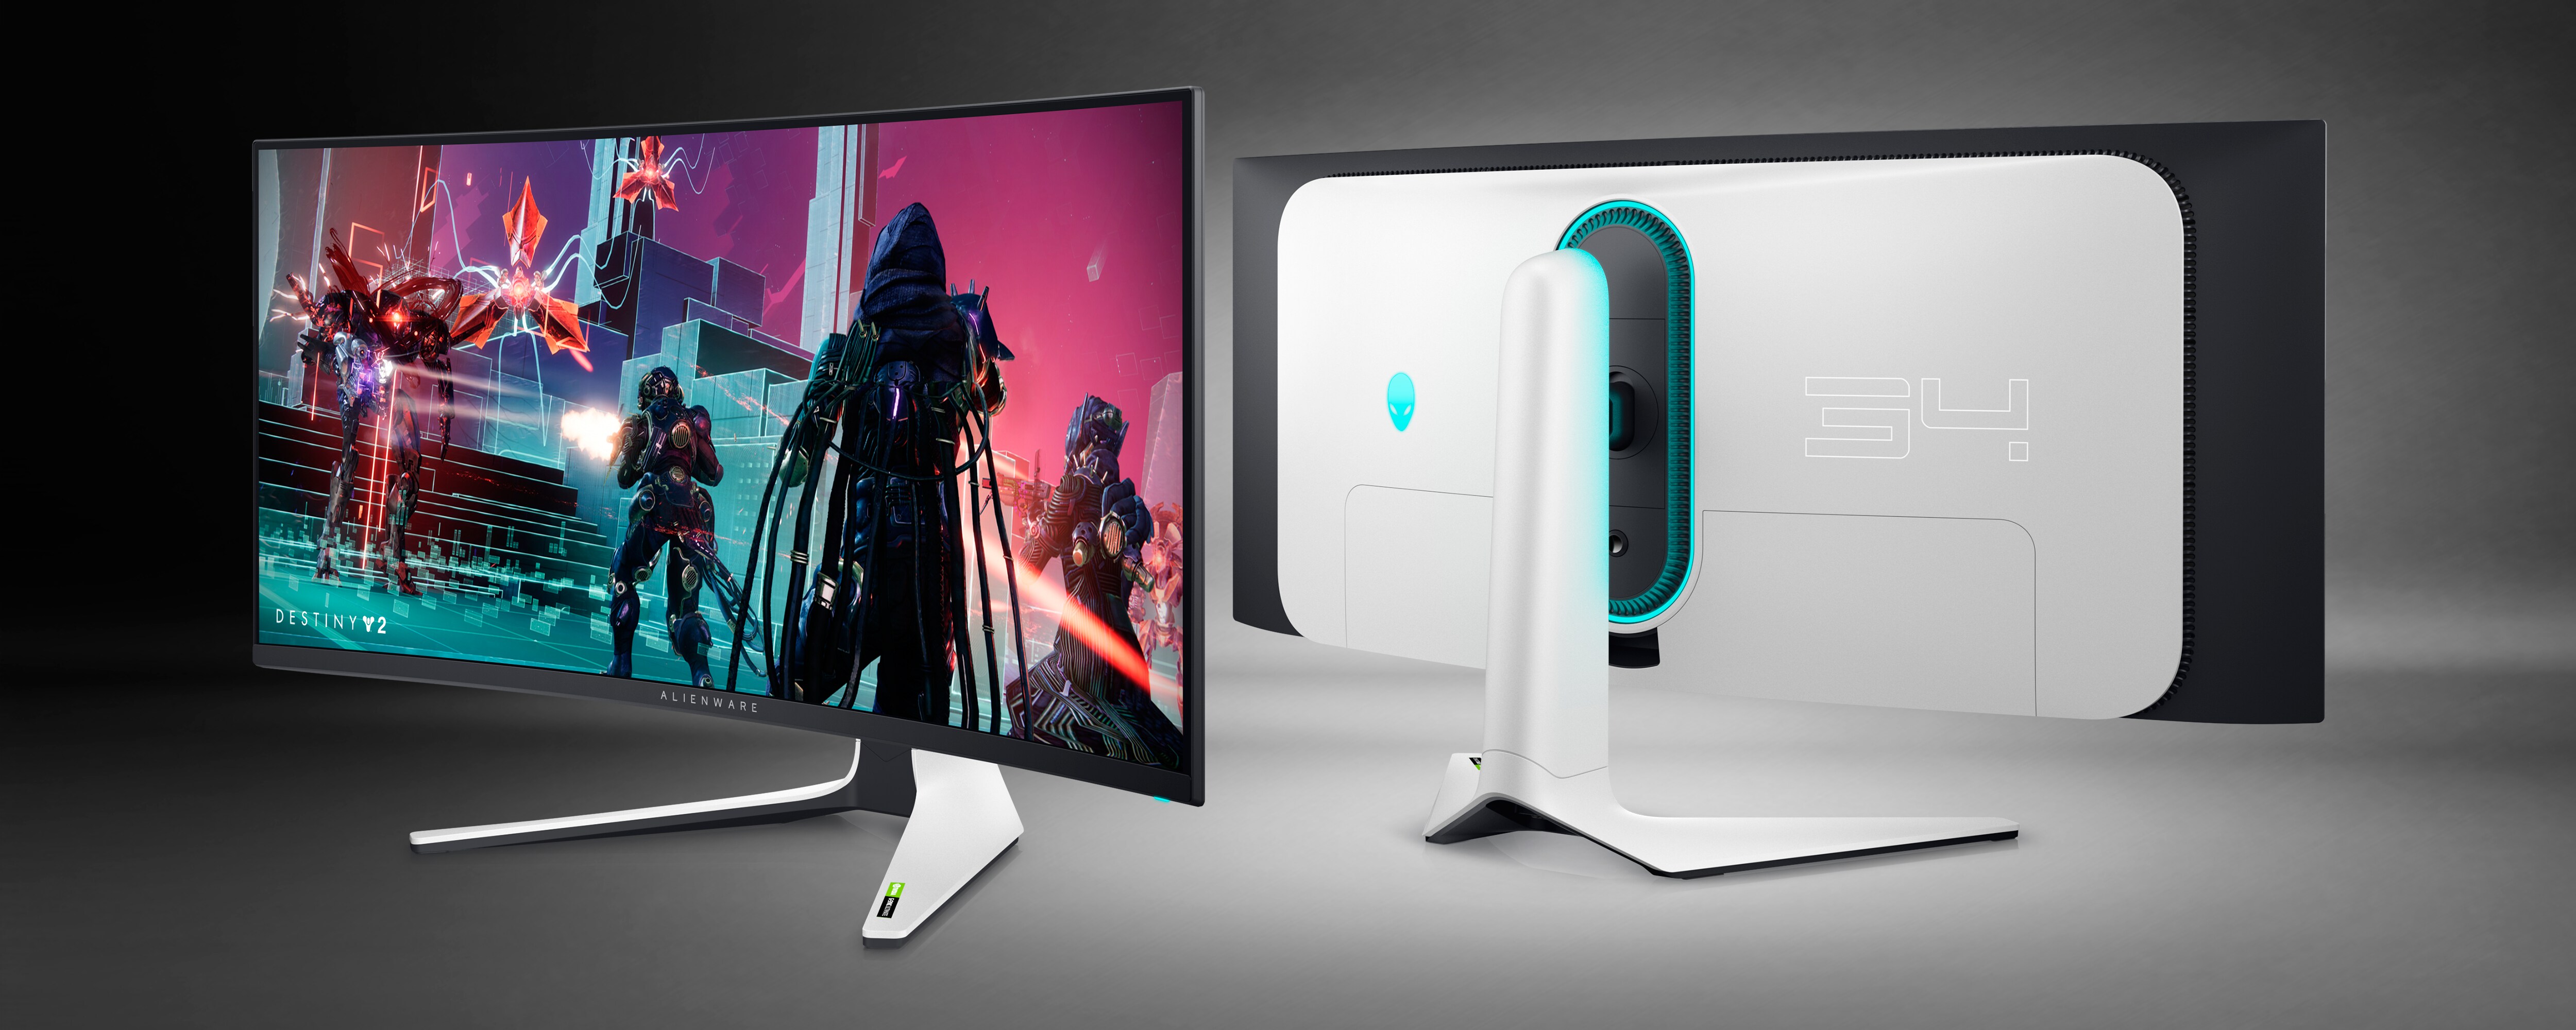 Alienware 34 Inch Curved QD-OLED Gaming Monitor - AW3423DW | Dell 